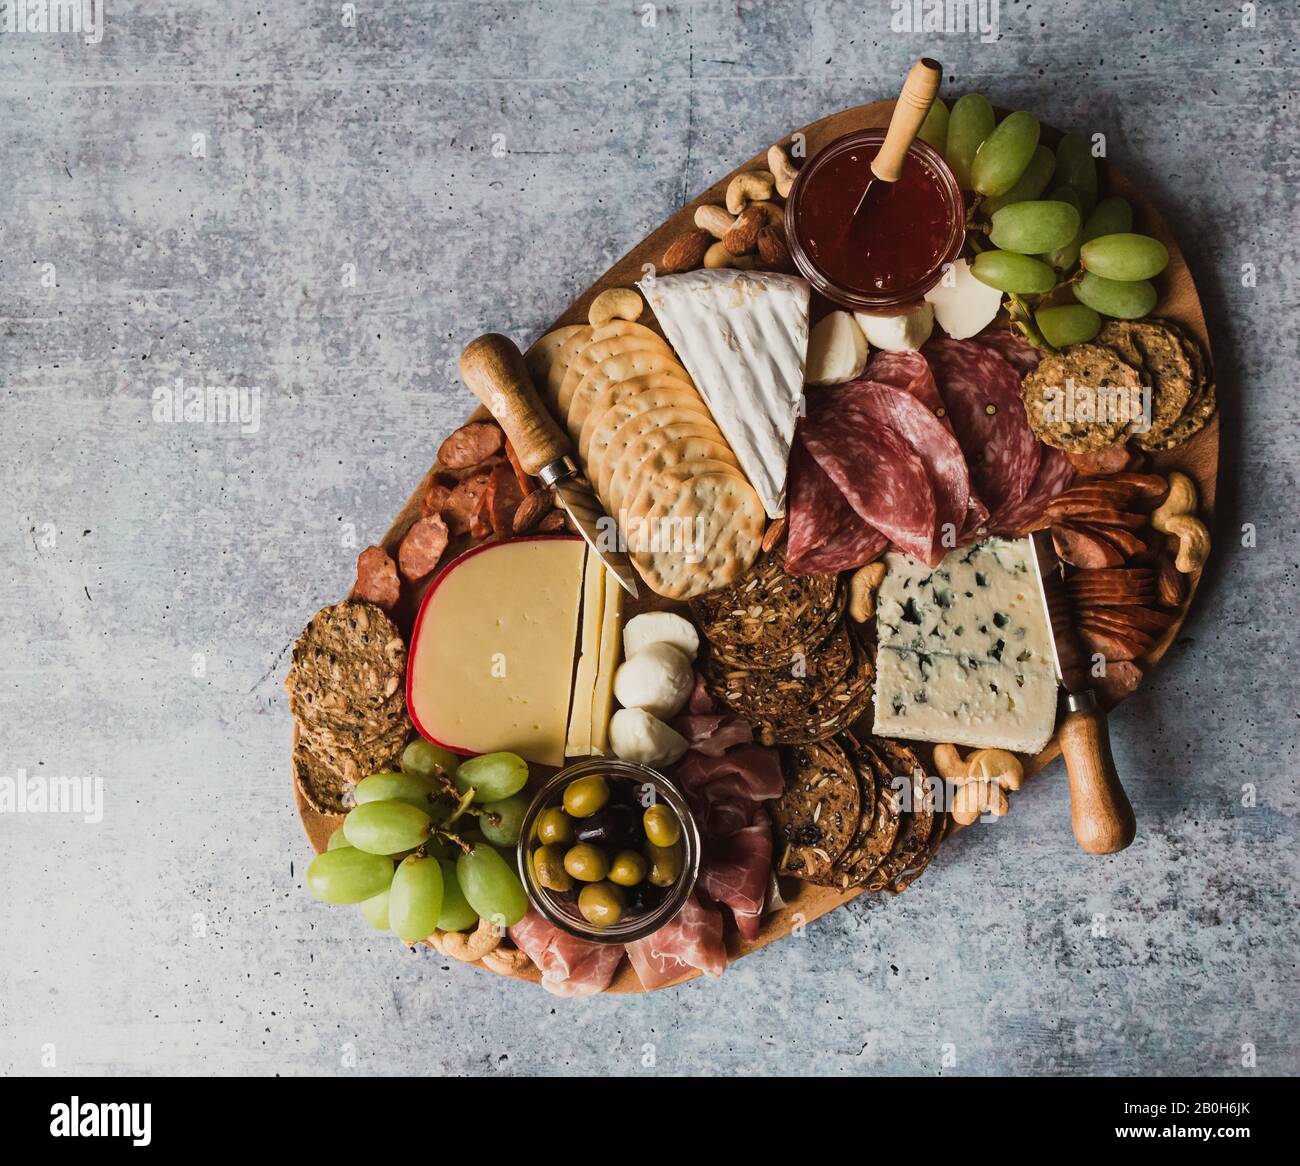 Top view of charcuterie board of meat and cheese on stone counter Stock  Photo - Alamy